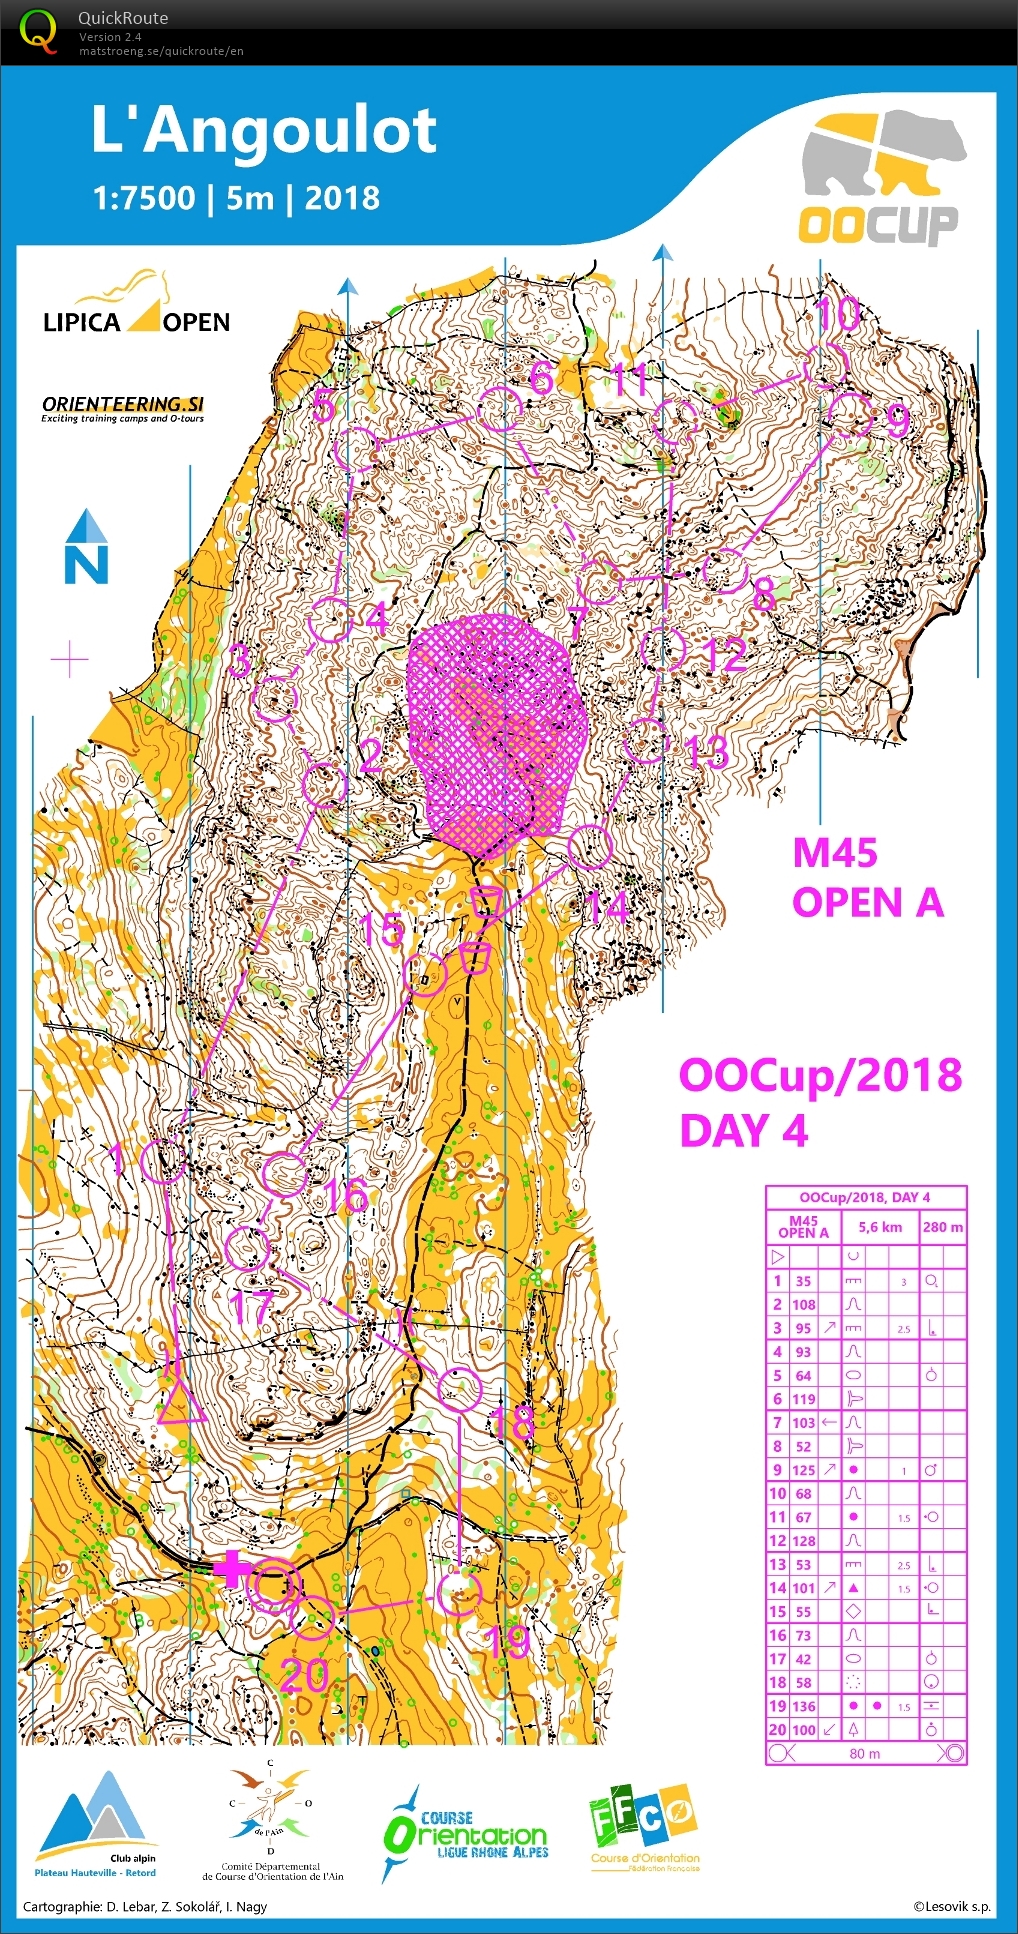 OOcup2018 OPEN A - Day4 (28/07/2018)